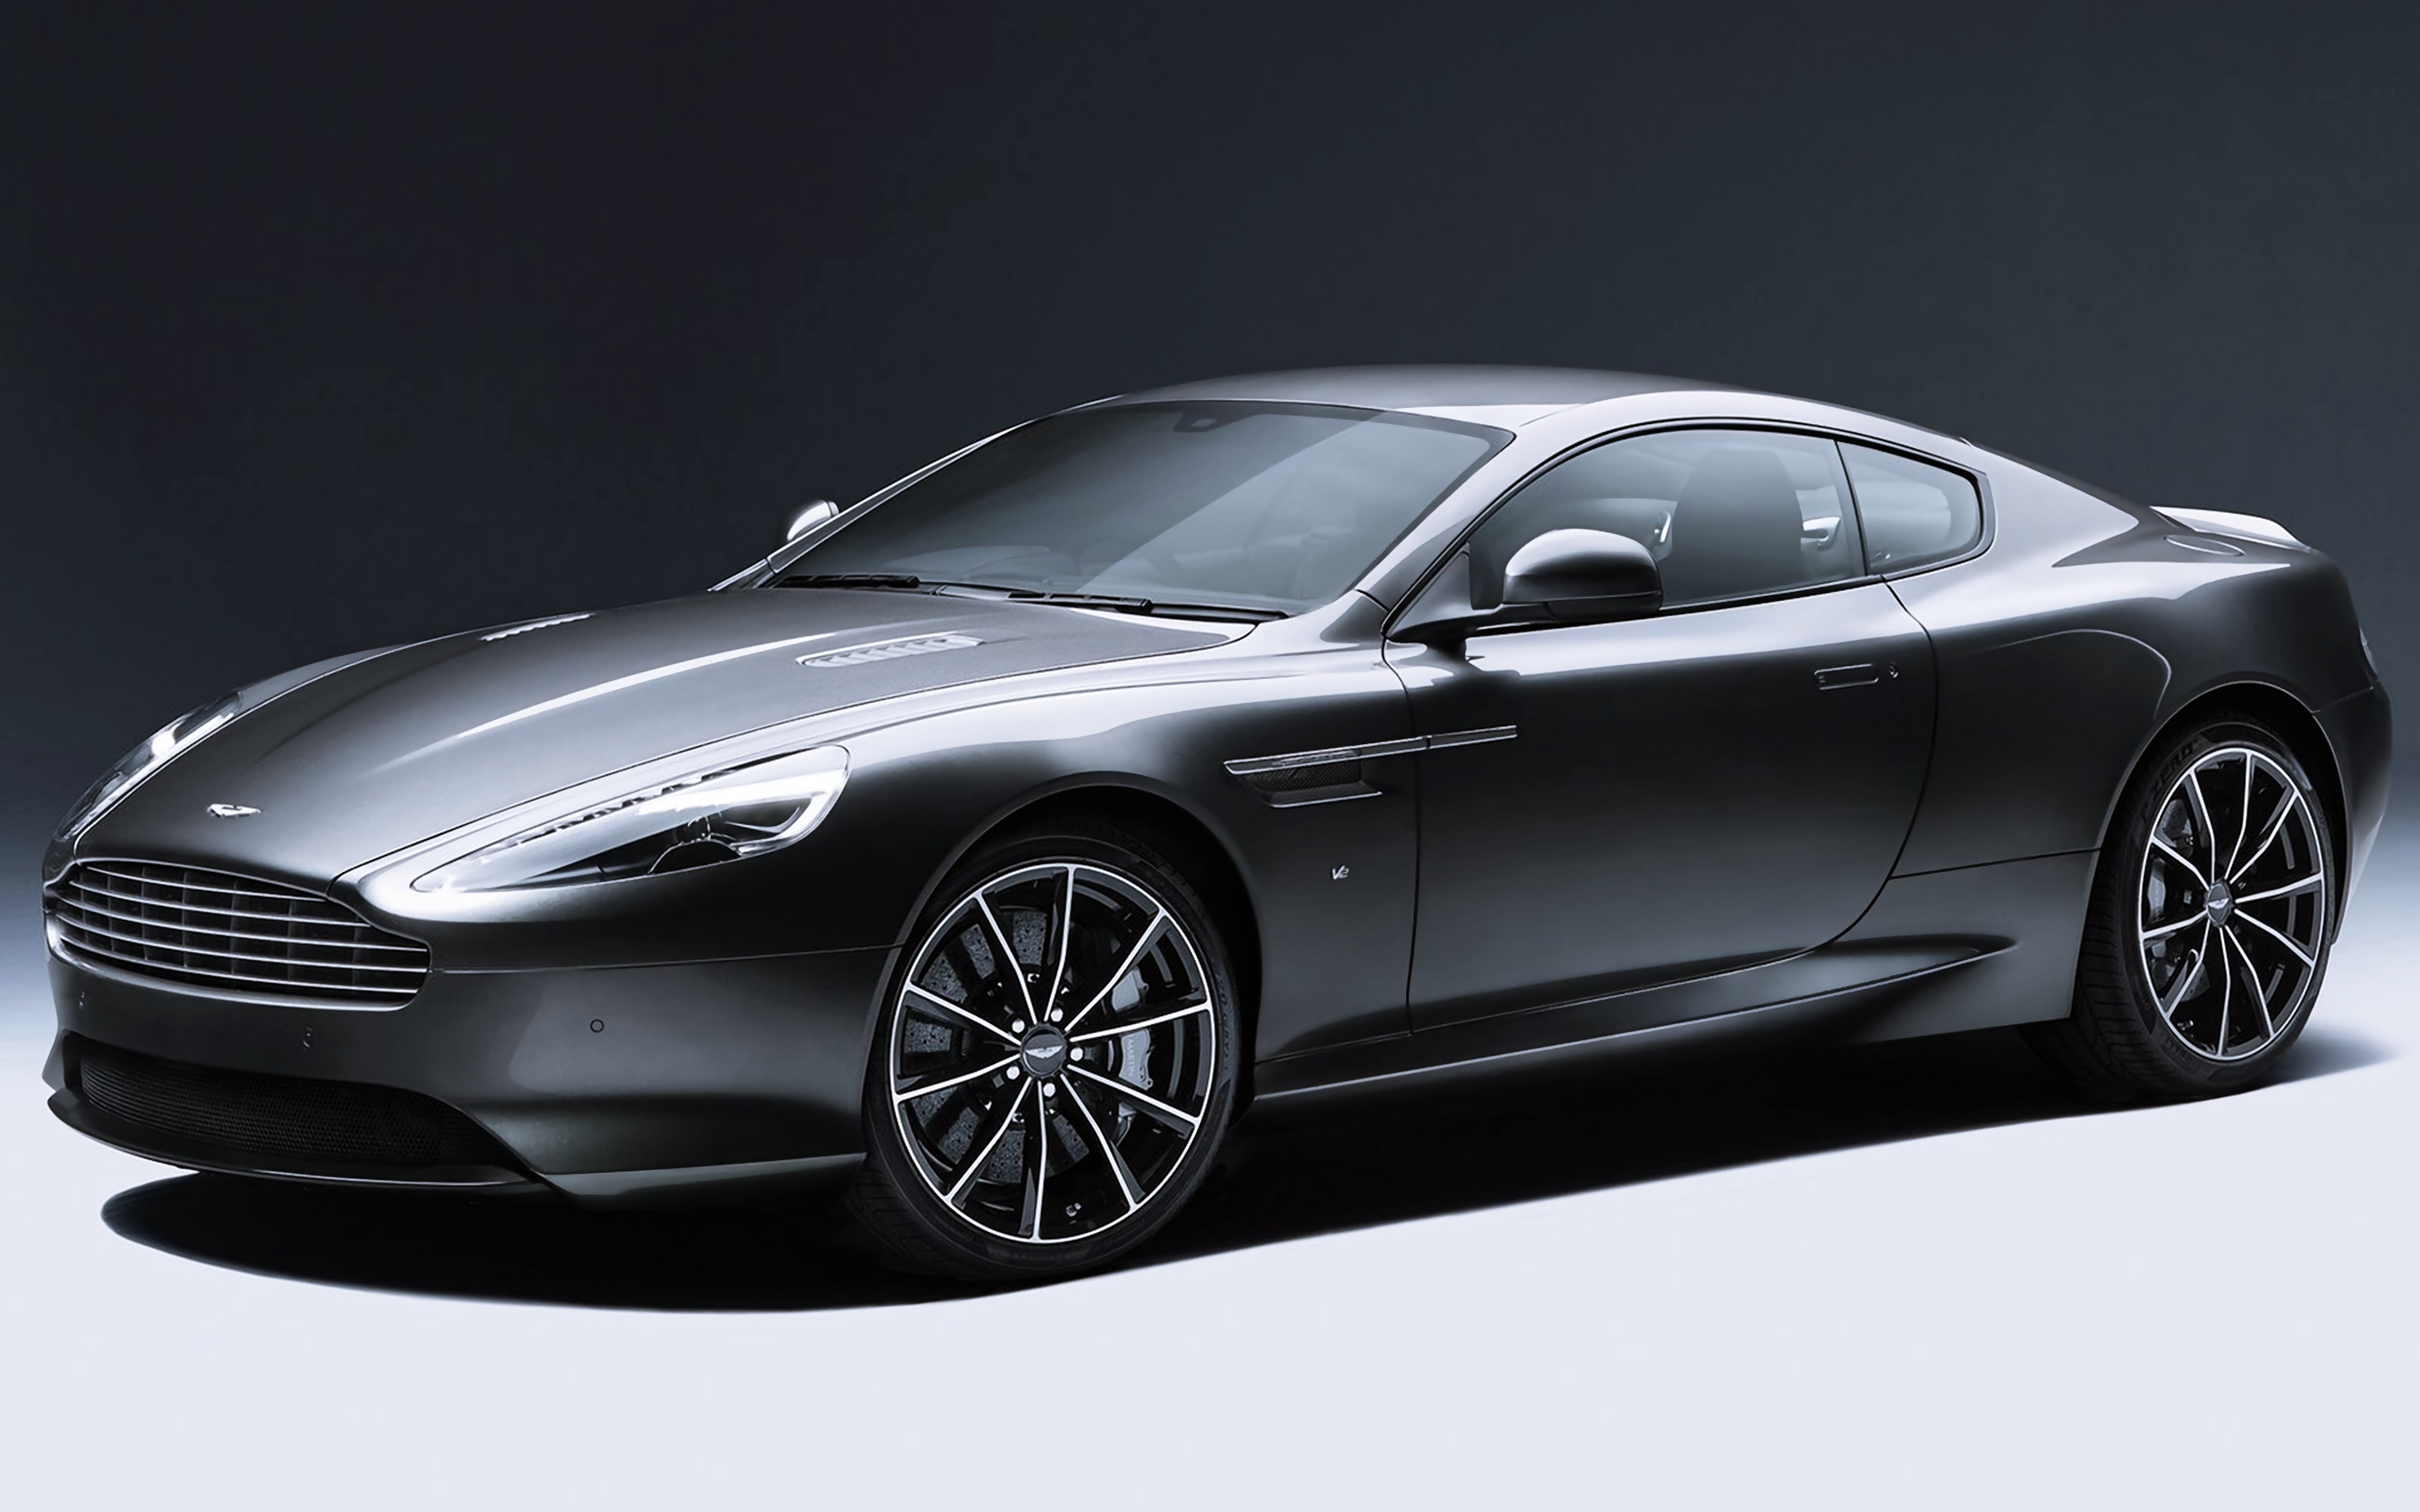 2008 Aston Martin DB9 - Wallpapers and HD Images | Car Pixel